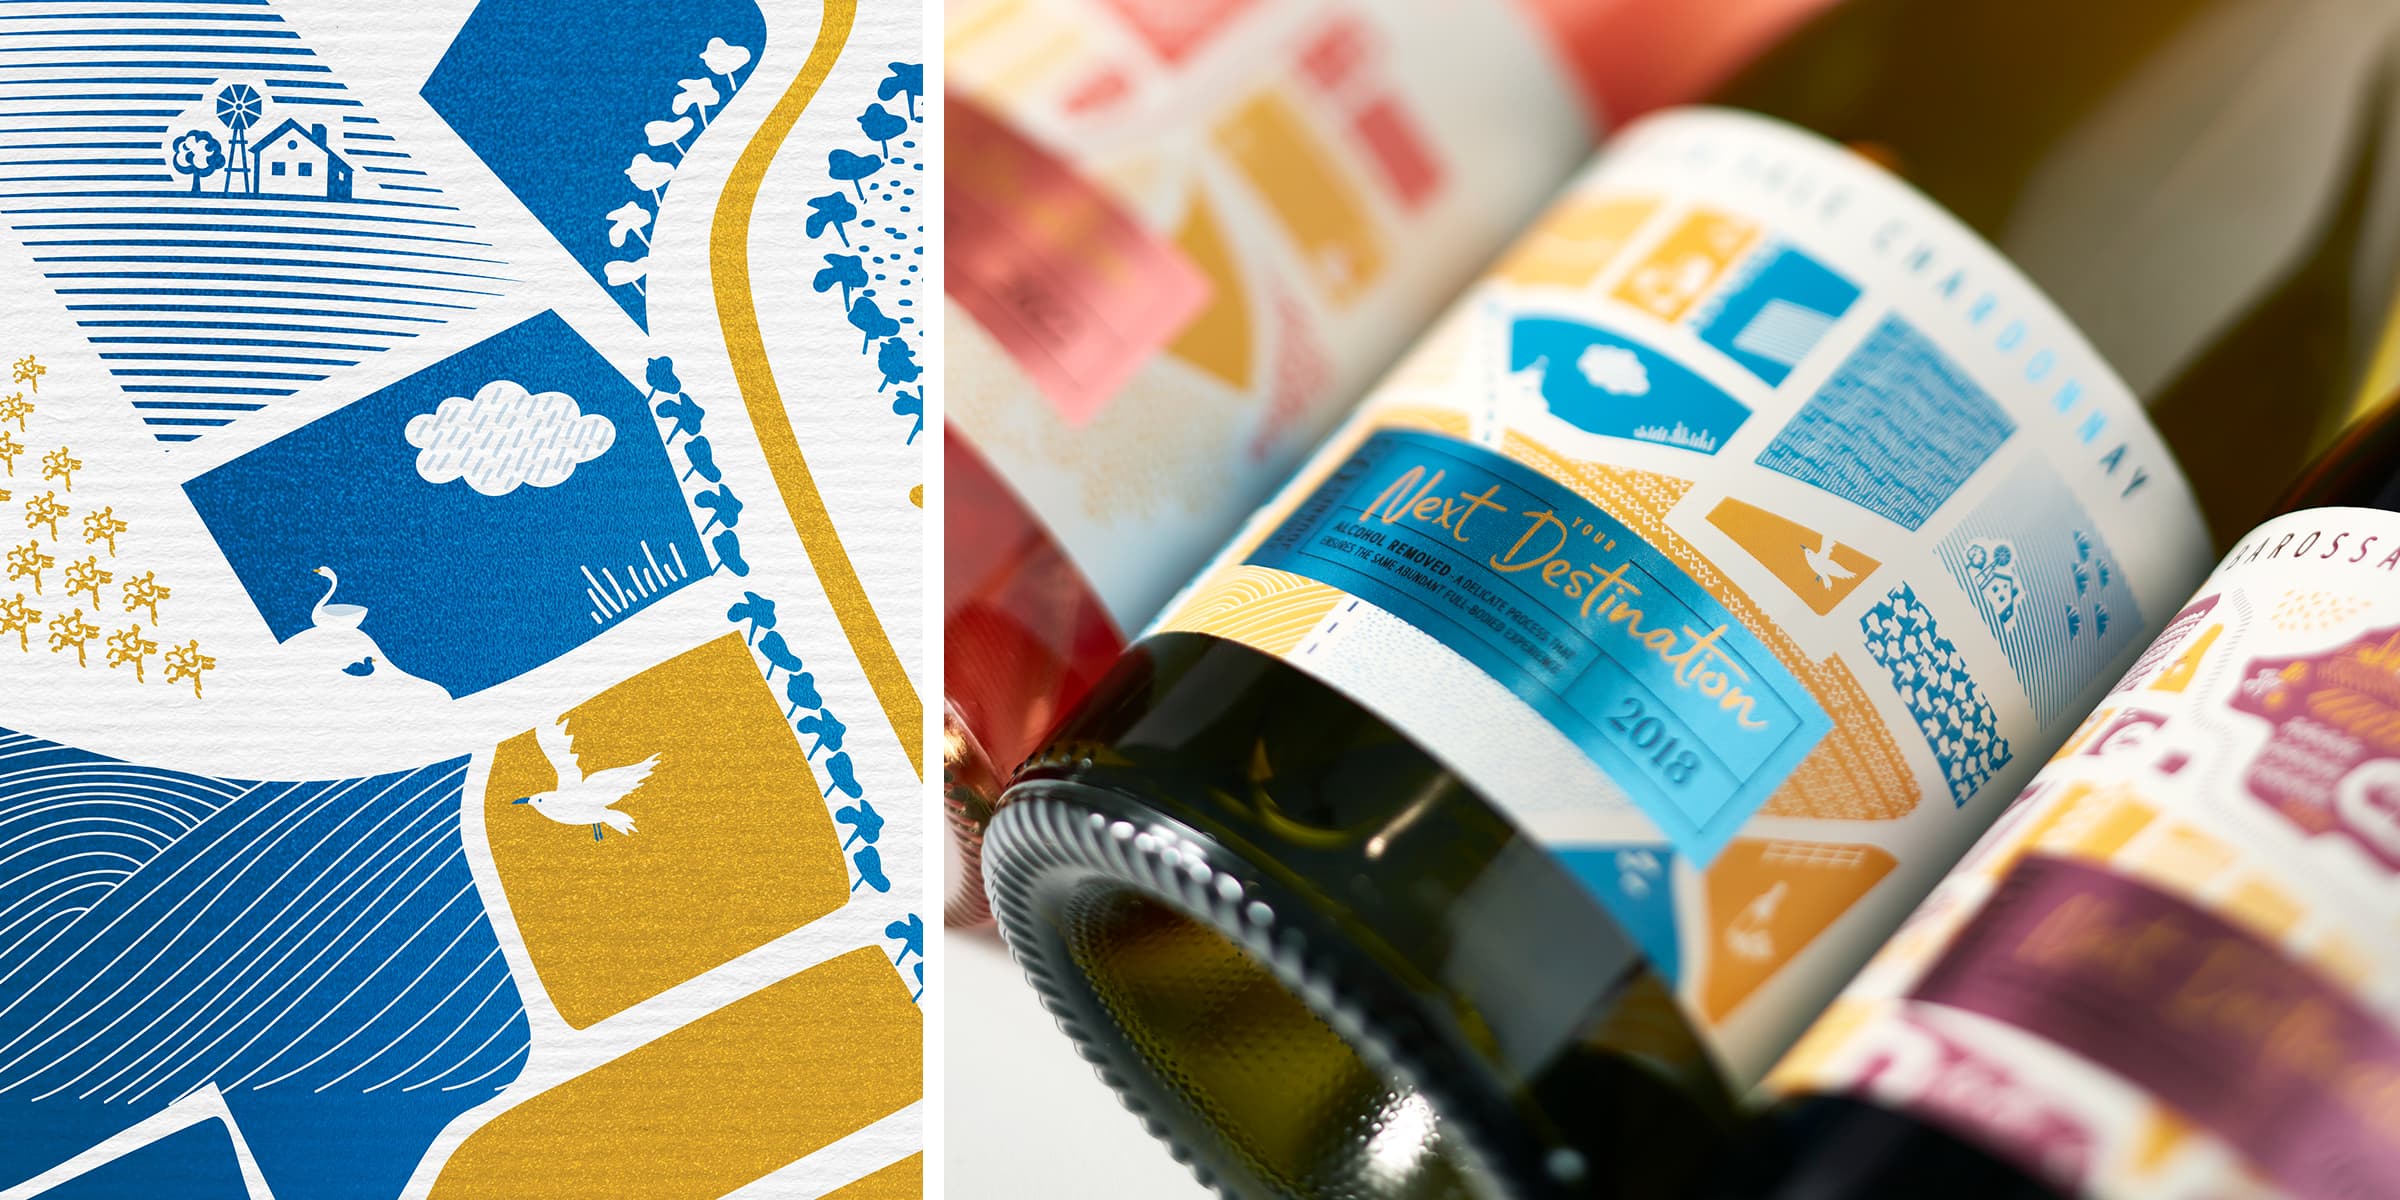 non-alcoholic-wine-boxer-and-co-sydney-design-agency-packaging-design-branding-blue-map-regional-beautiful